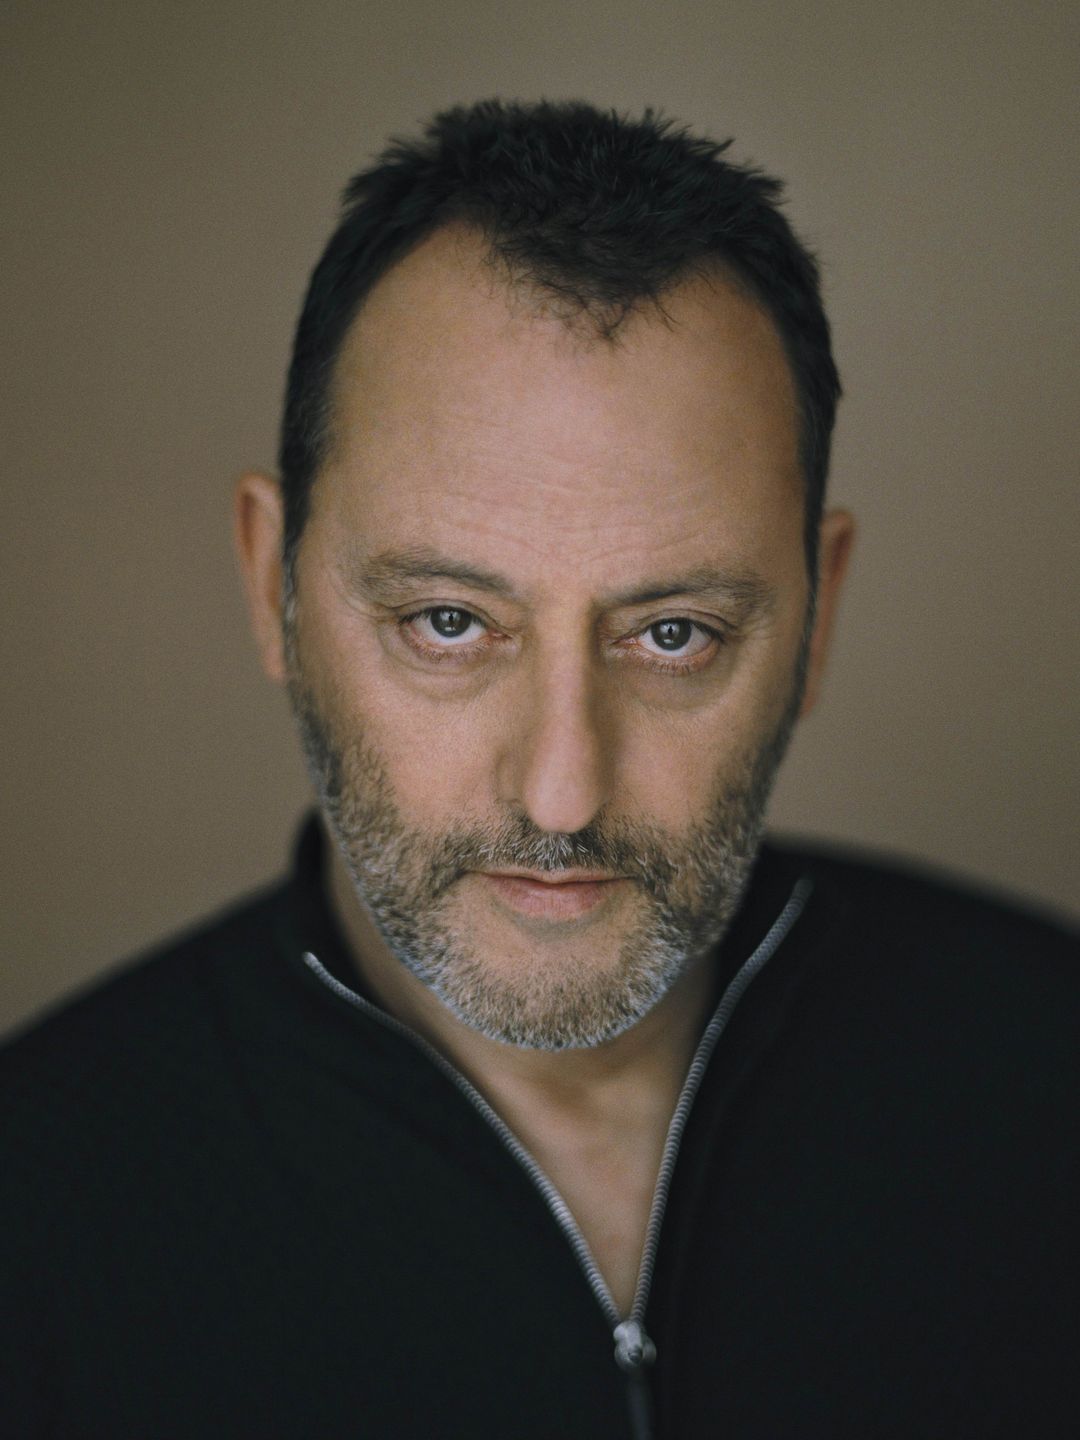 Jean Reno in his youth